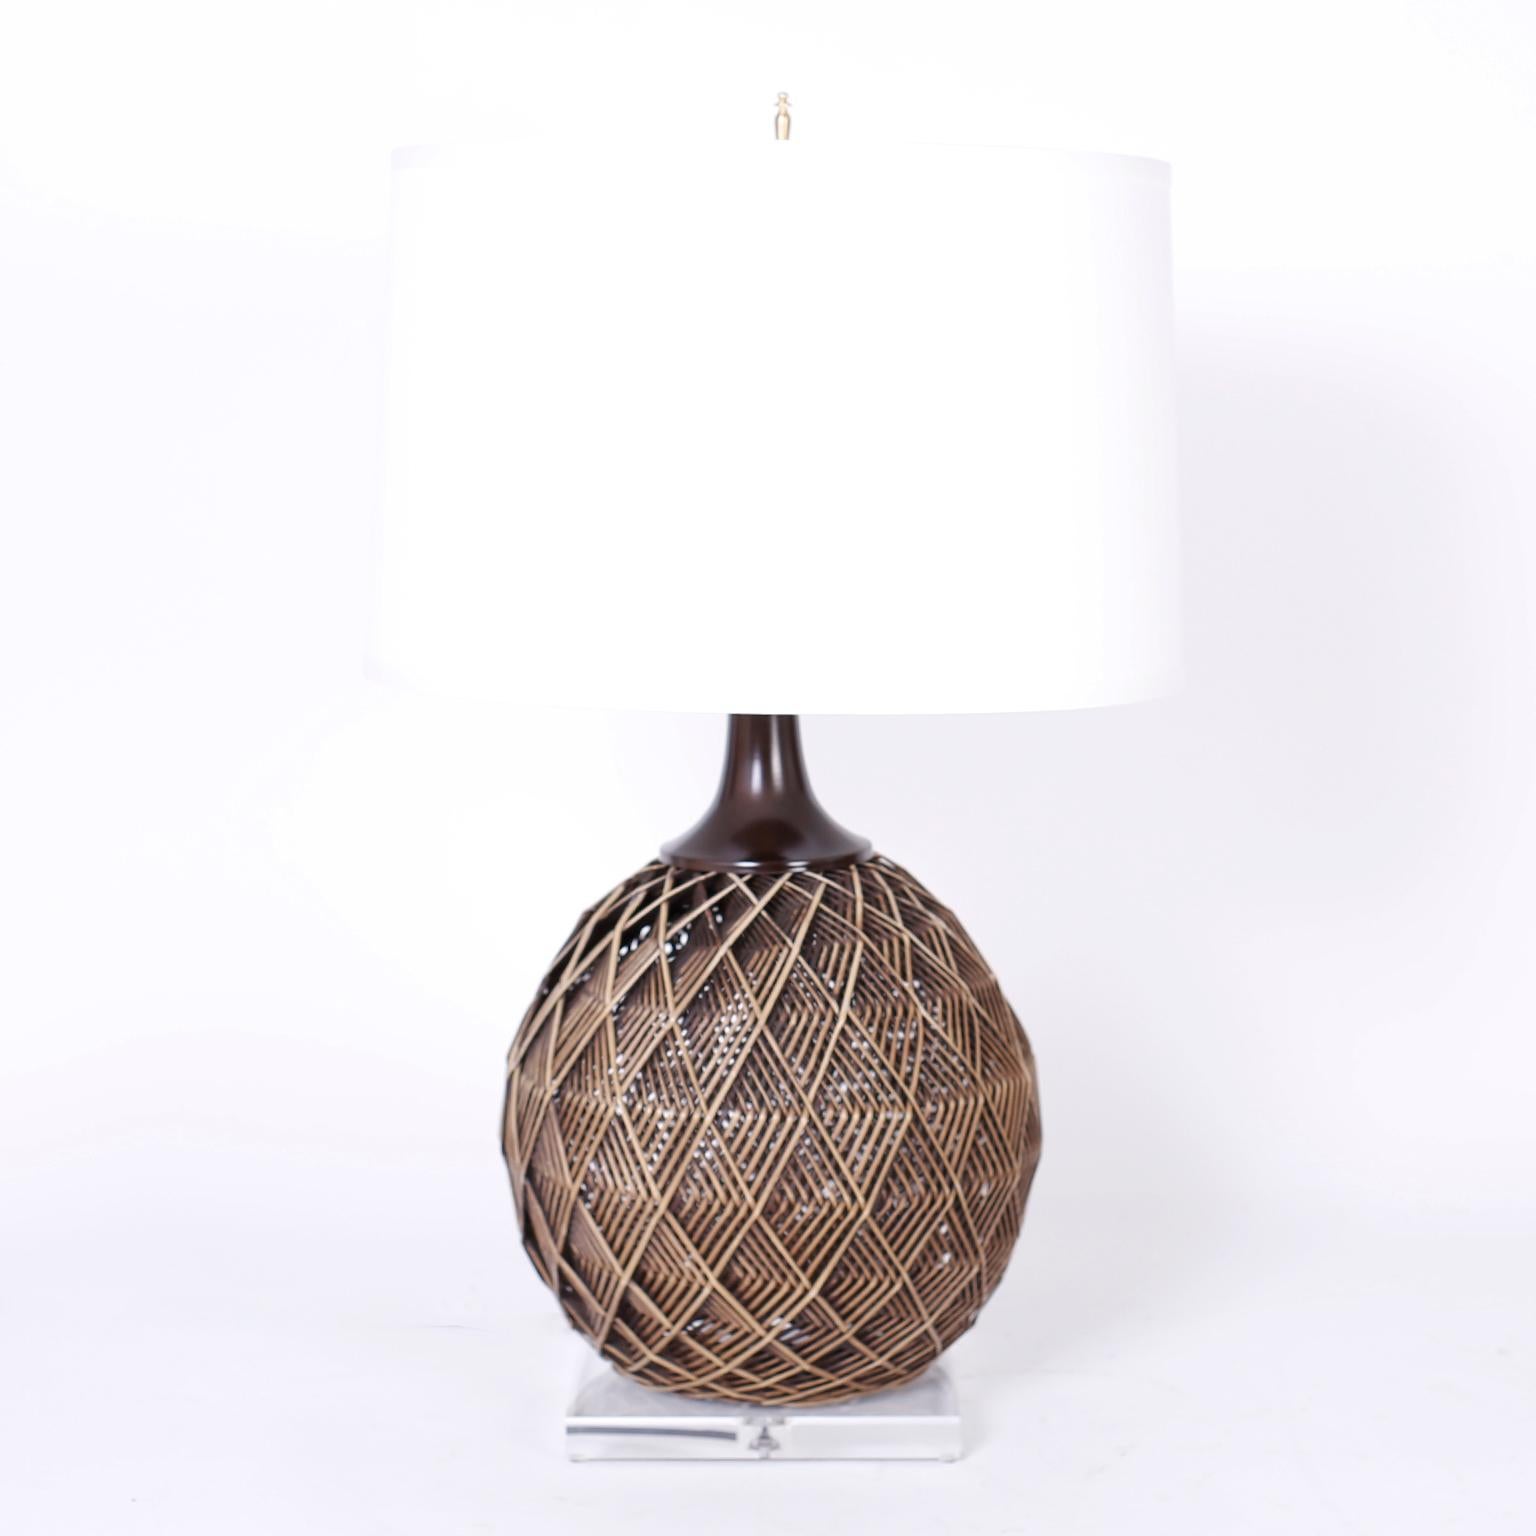 Pair of midcentury table lamps with an ingenious multi-layer geometric woven rattan technique that creates sculptural and emotional depth and presented on Lucite bases.